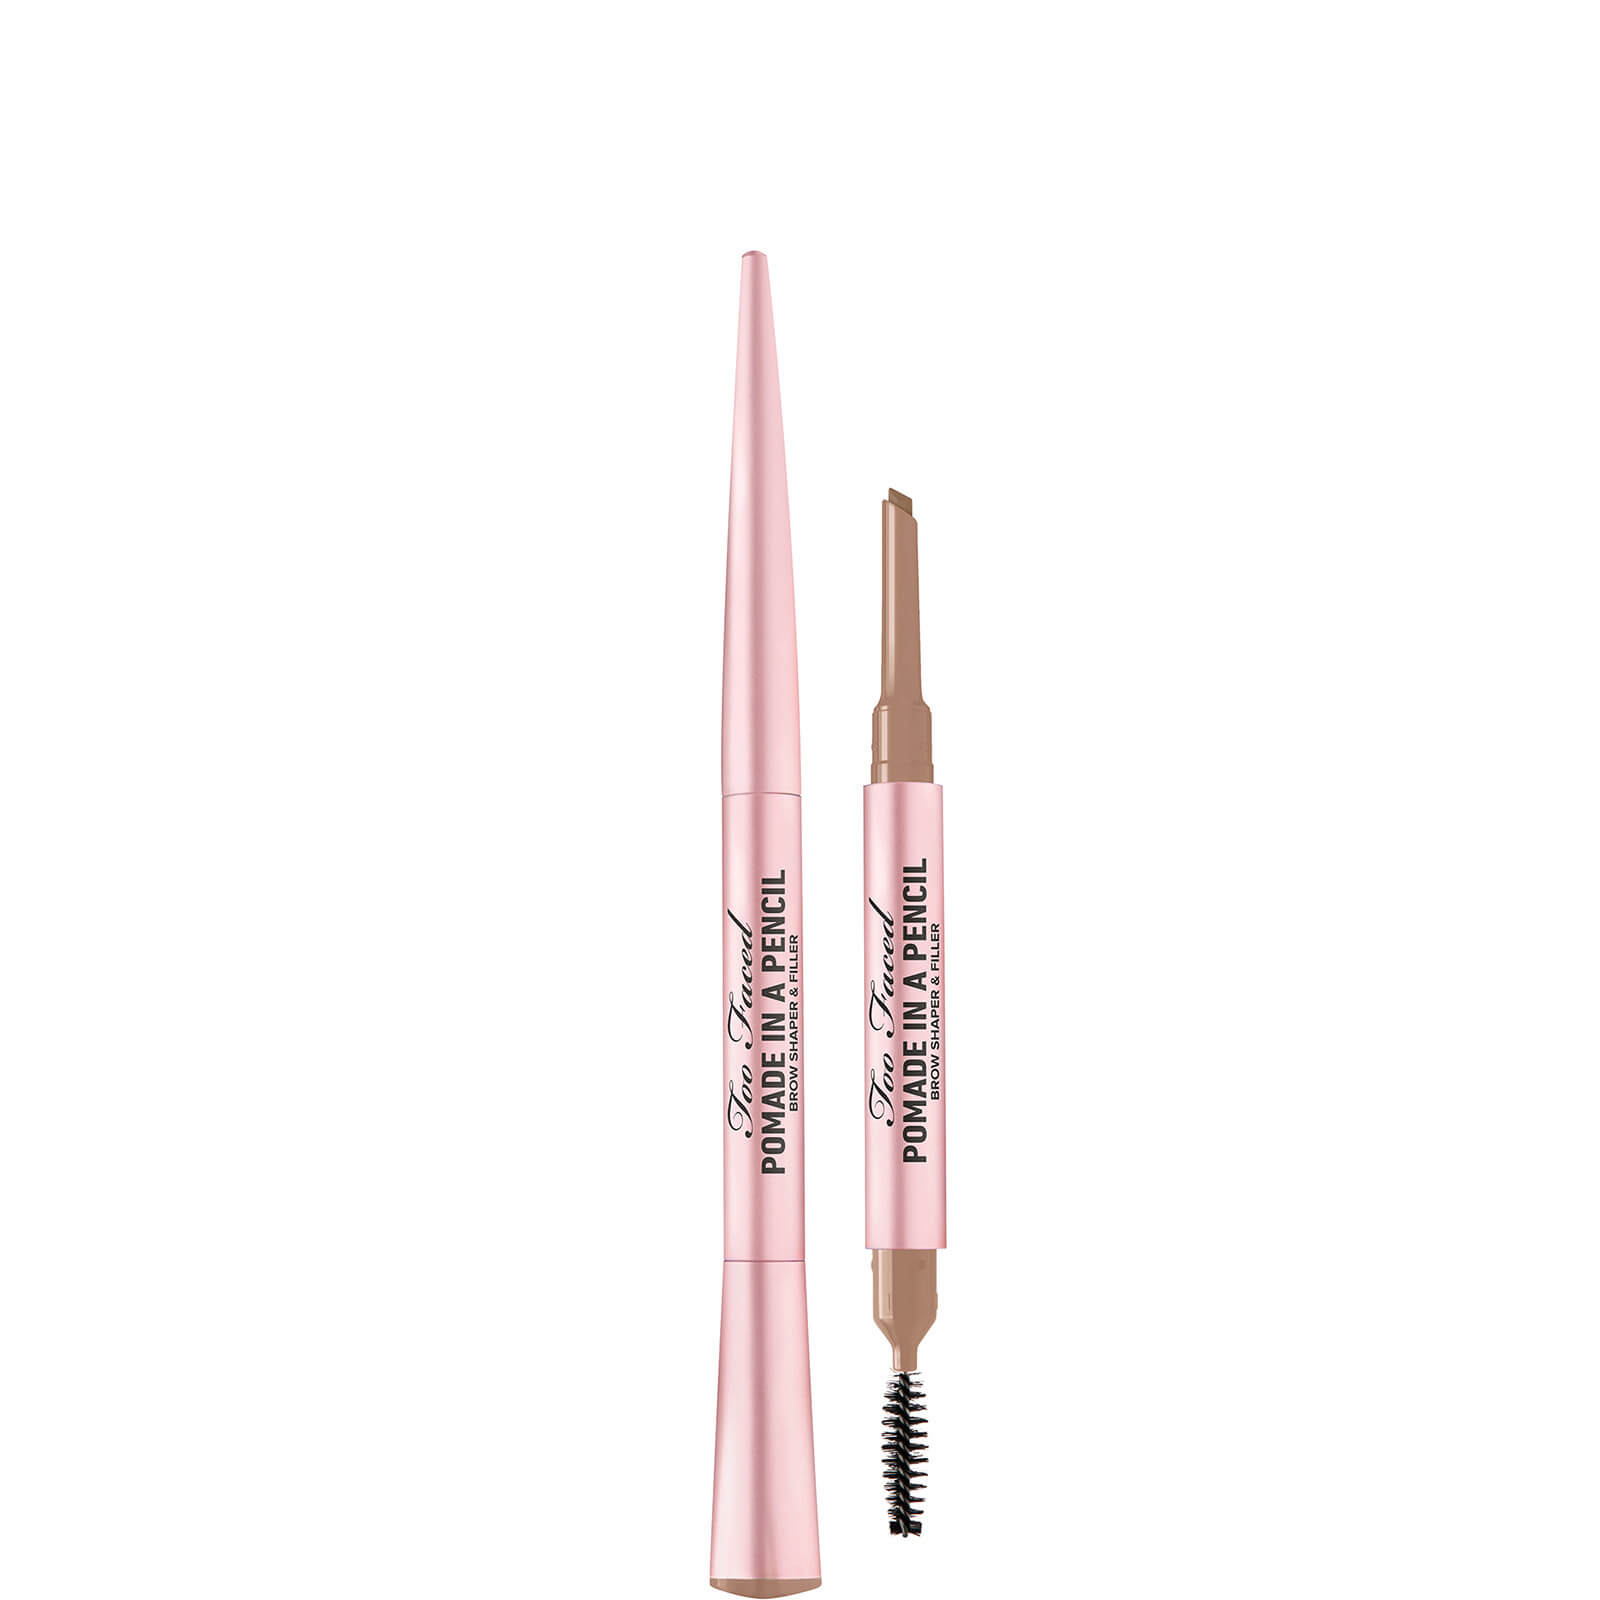 Too Faced Brow Pomade in a Pencil 0.19g (Various Shades) - Taupe